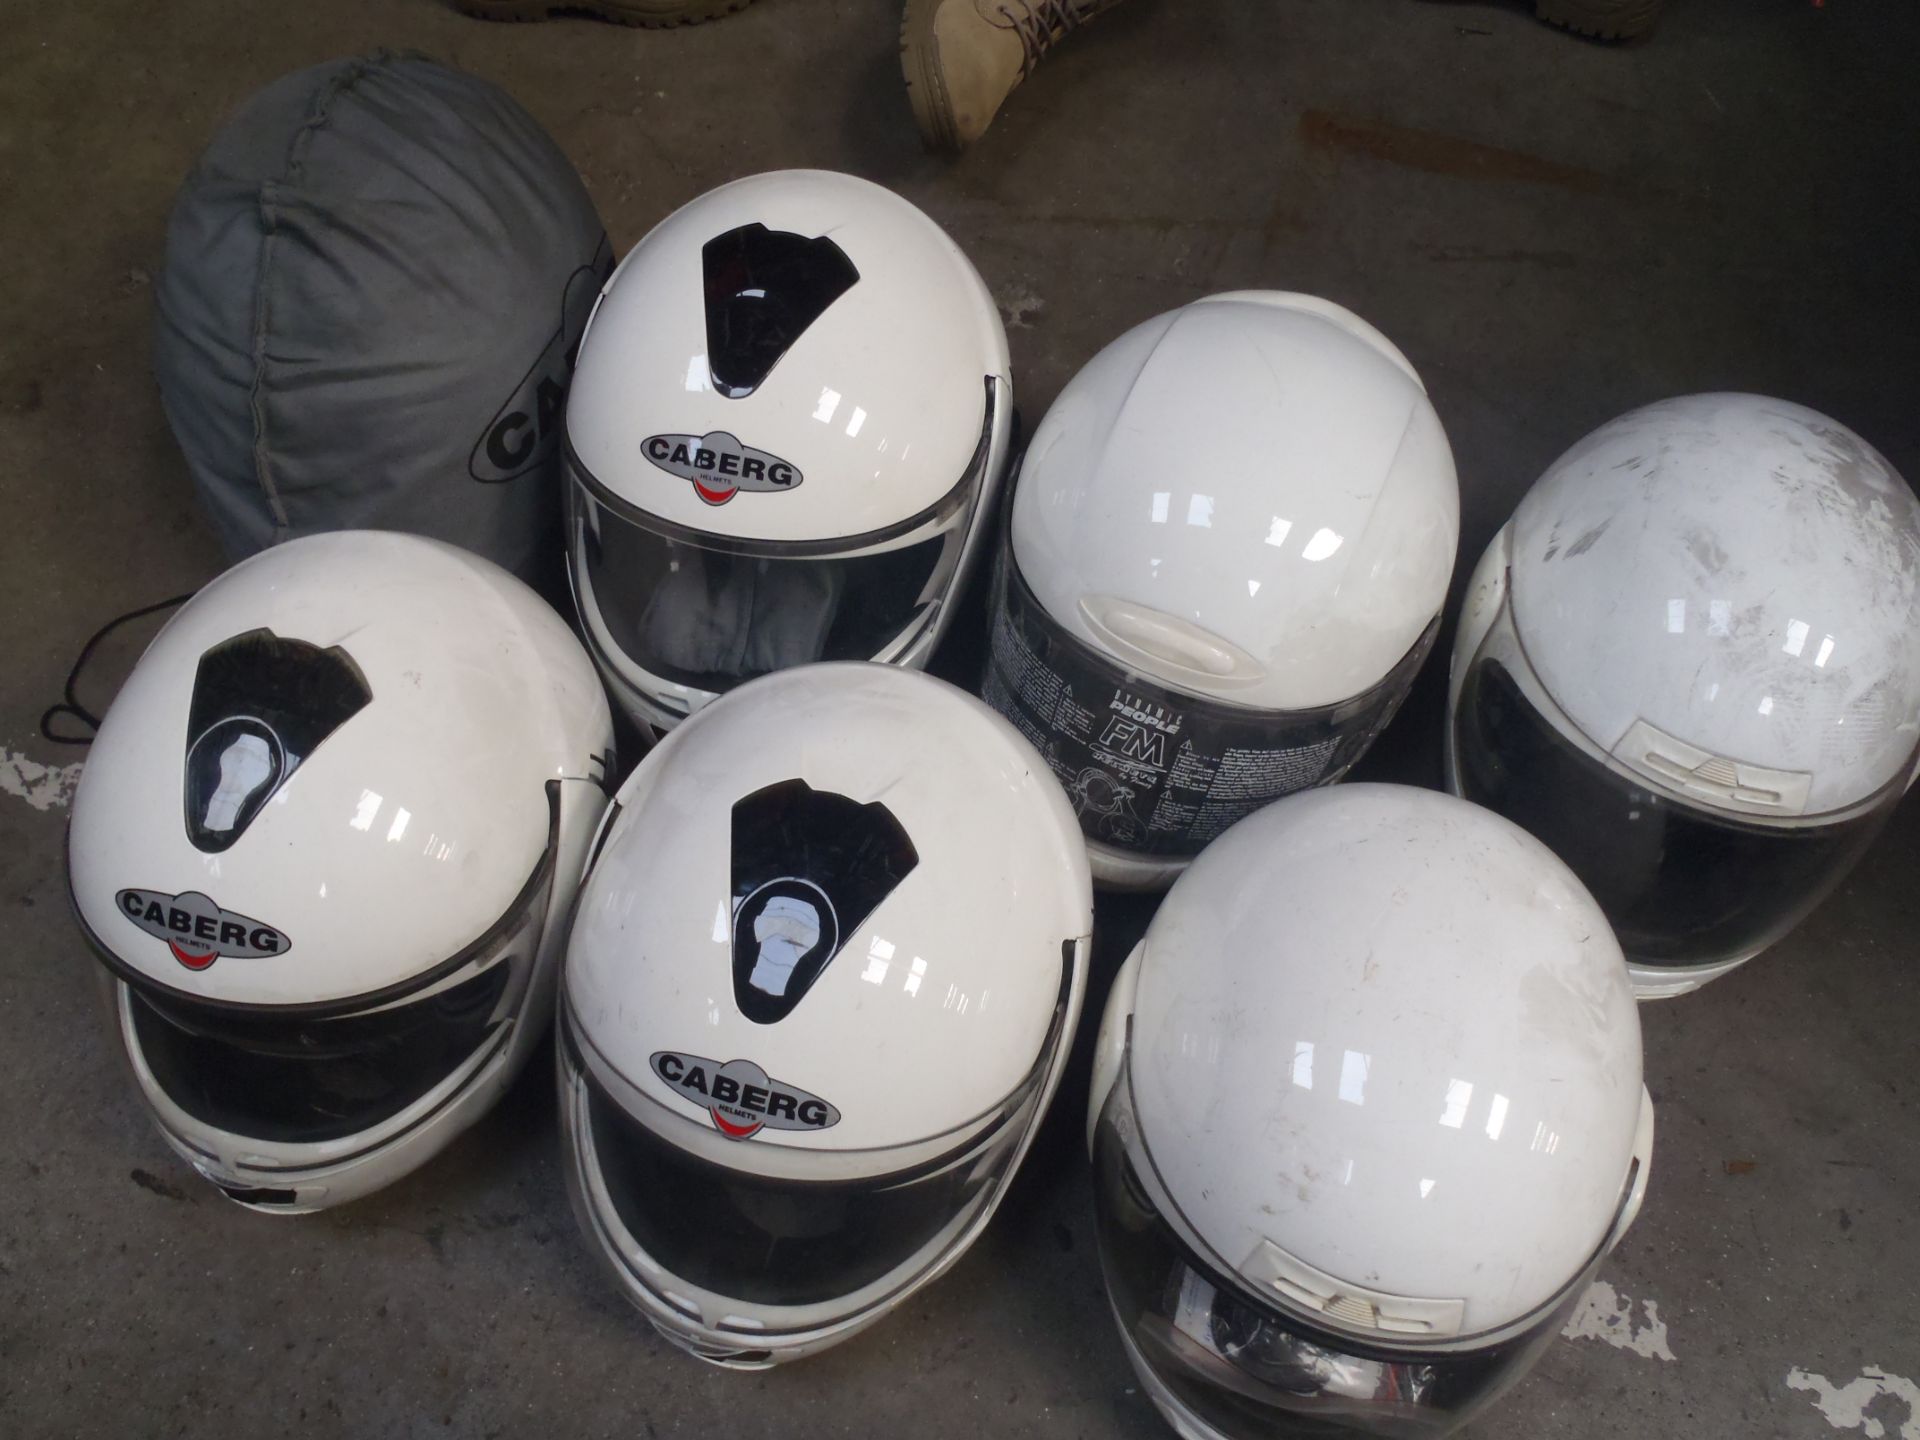 PACK OF 7 - CABERG MOTORCYCLE HELMETS - USED - UNTESTED